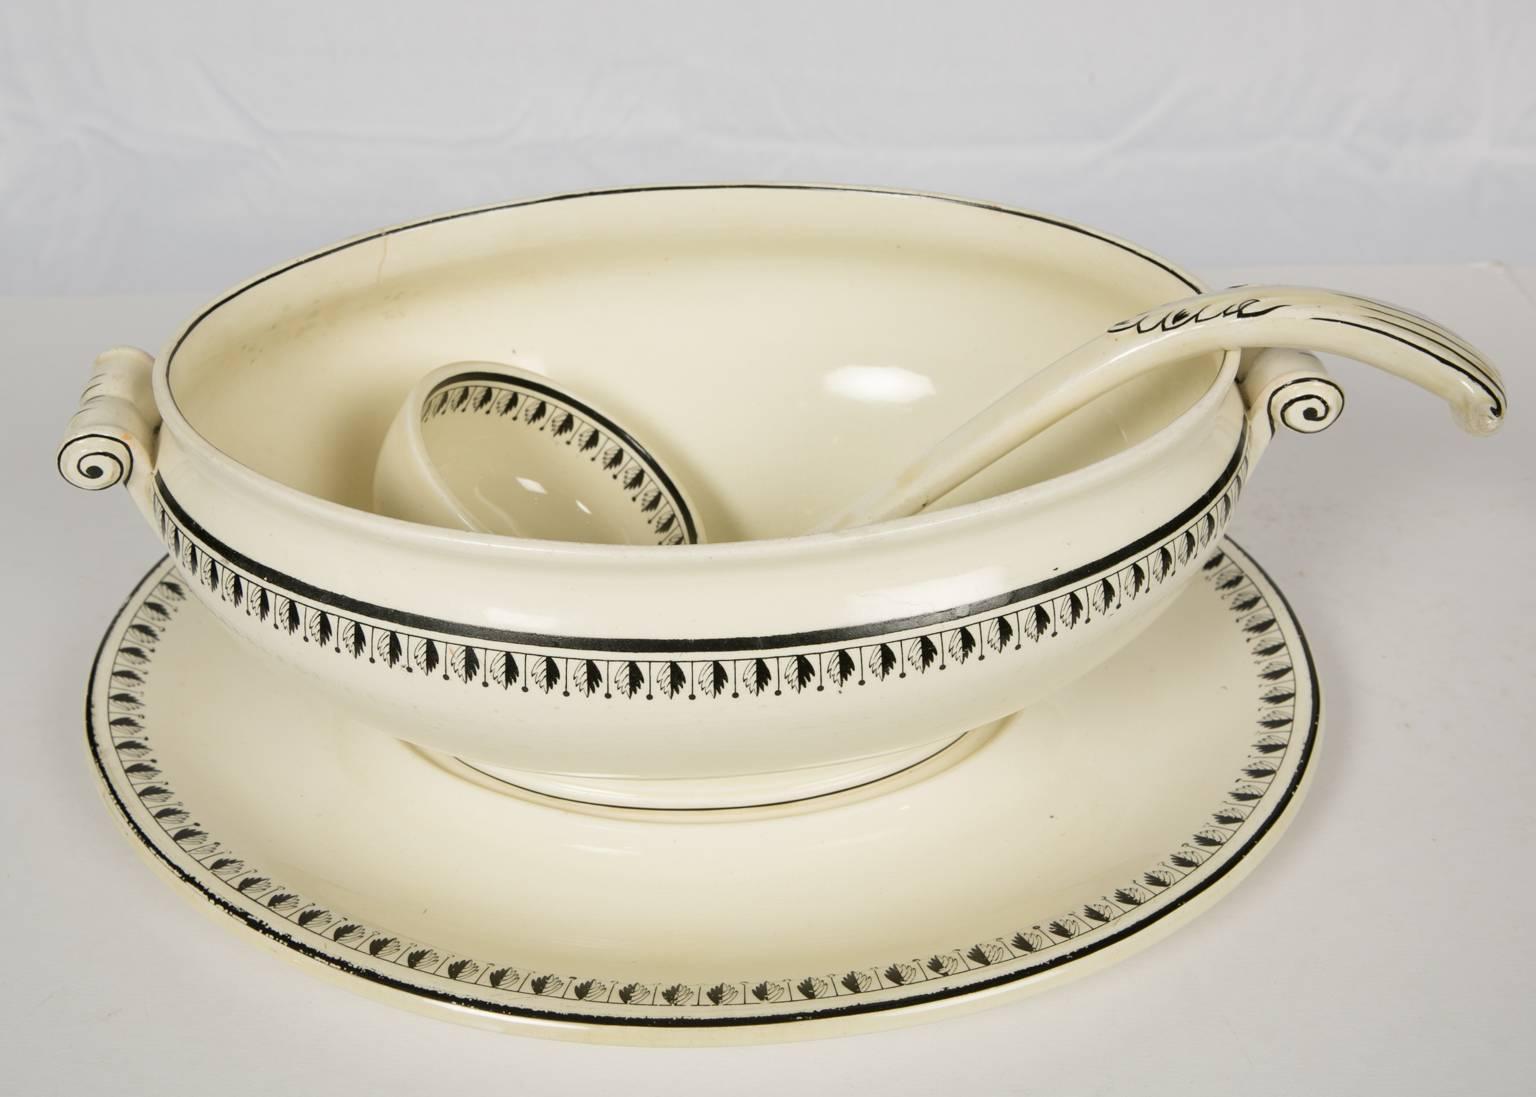 This elegant 19th century Wedgwood creamware soup tureen is modeled in an elegant oval shape. It is decorated with a neoclassical black leaf and dot design along both the border of the tureen and the cover. Surrounding the flower finial on the cover